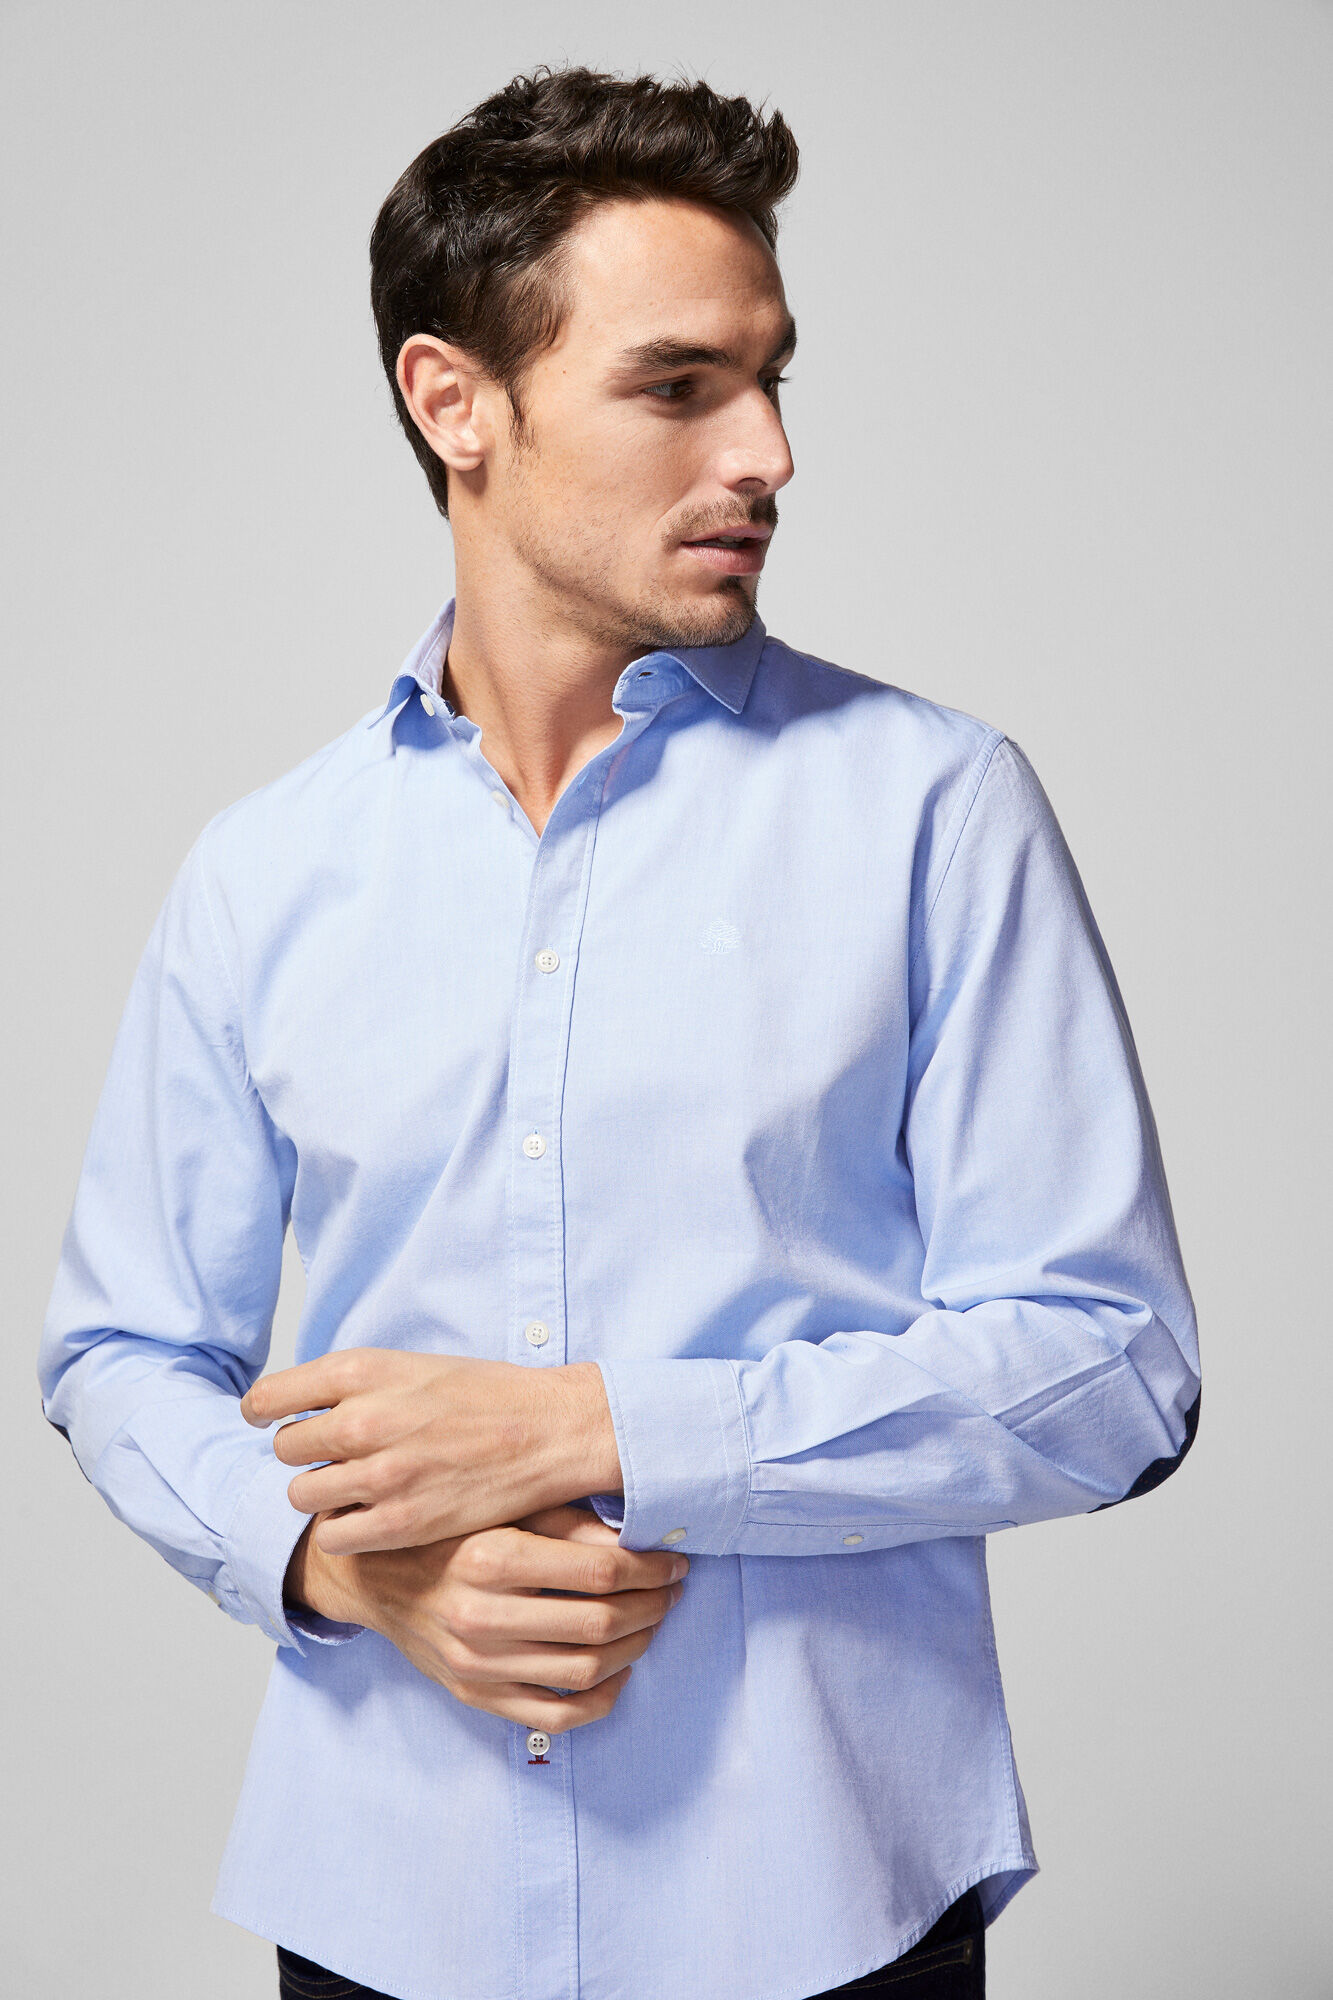 Camisas Springfield Hombre Top Sellers, GET 59% OFF,